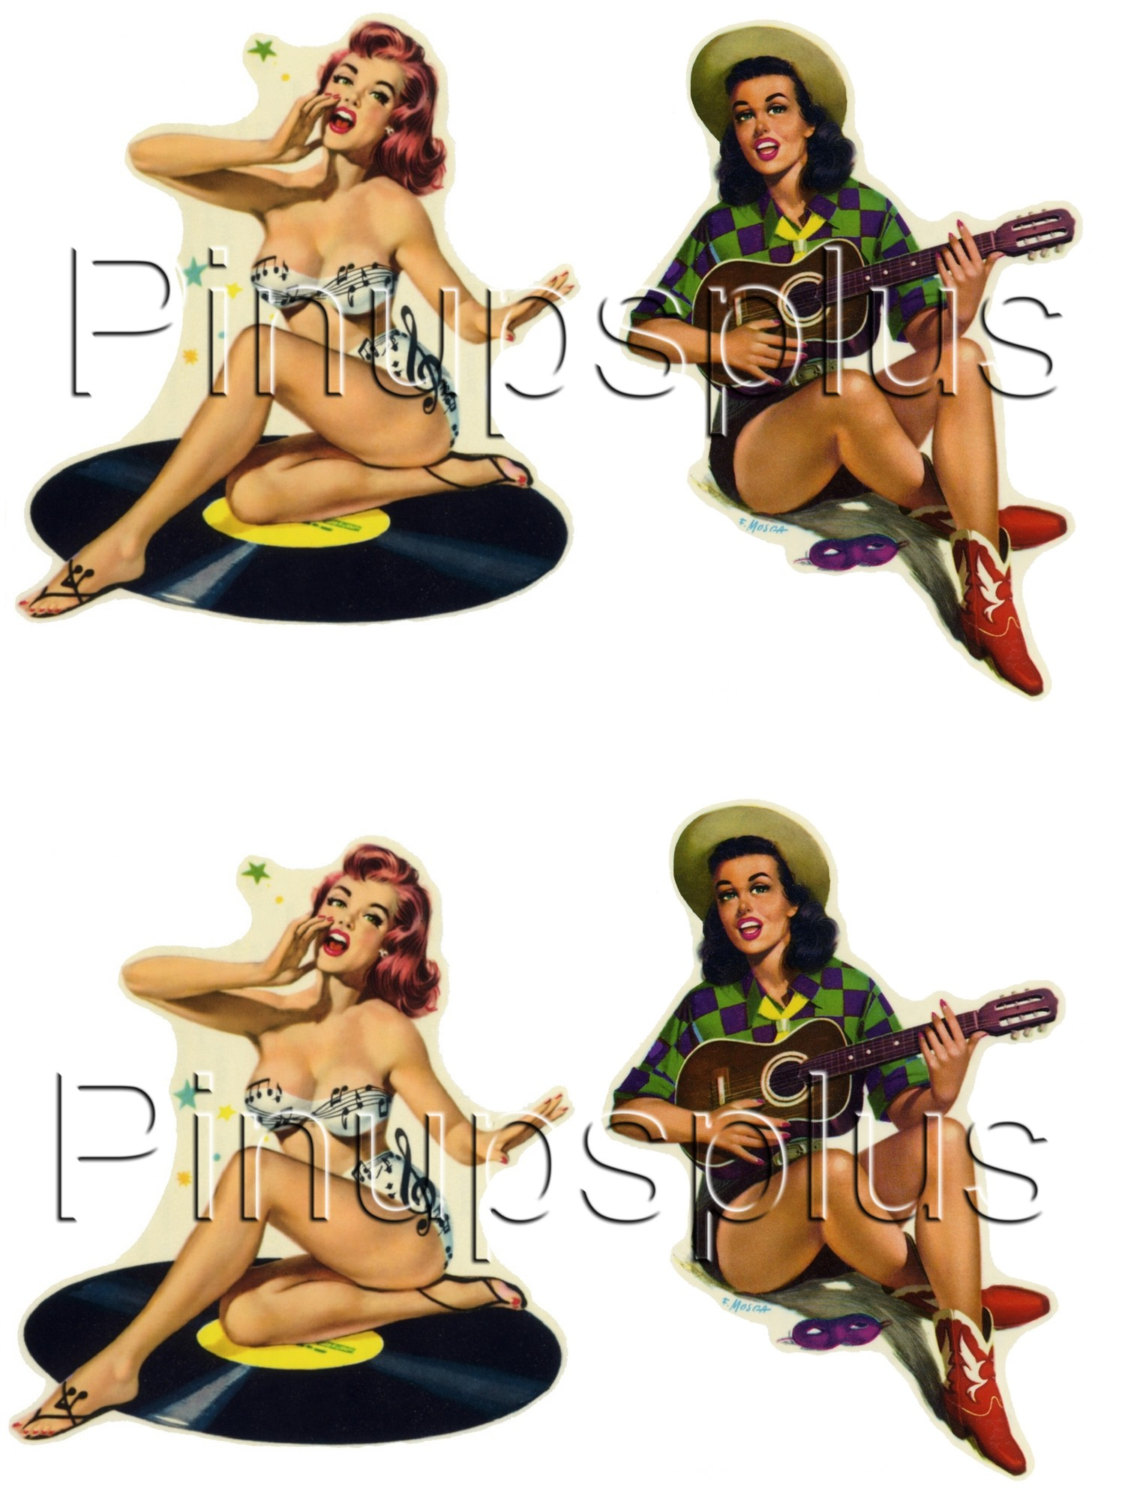 Ukulele Cowgirl Record Girl Rockabilly Pinup Decals by Pinupsplus.